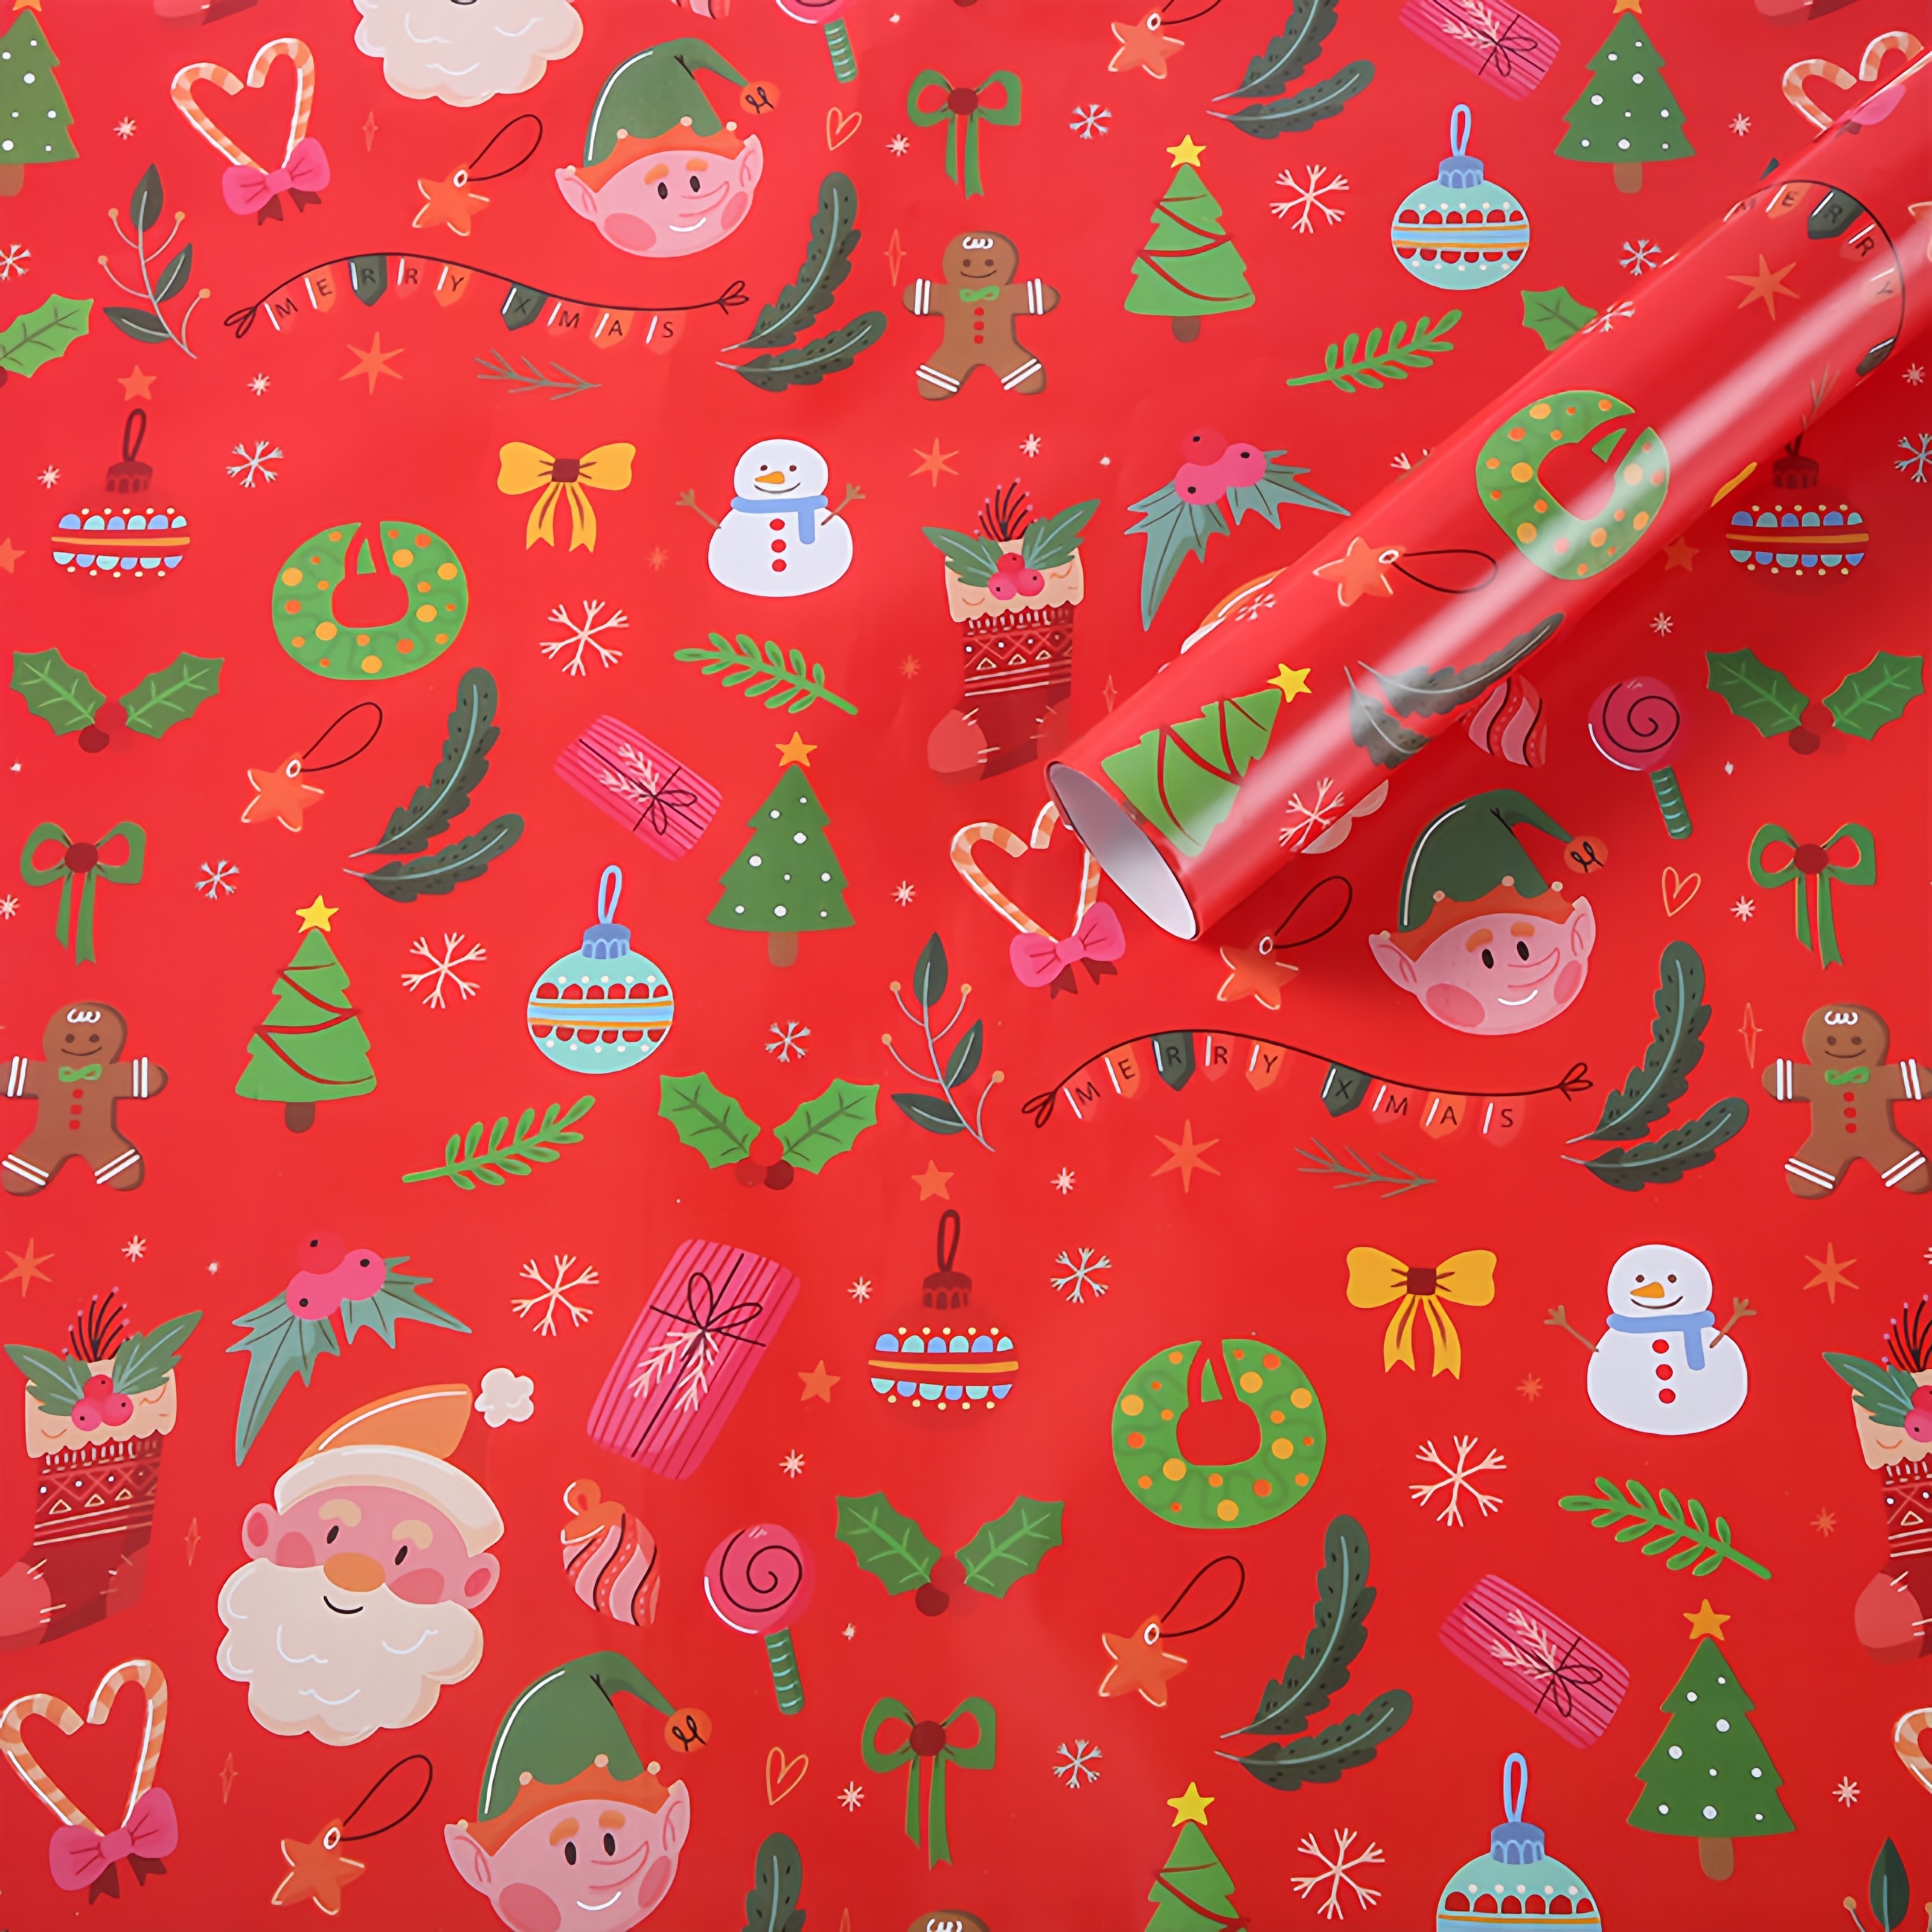 Christmas Tissue, Packing Paper, Packplan, Xmas, Paper, Eco, Wrapping Paper,  Gift Wrap 